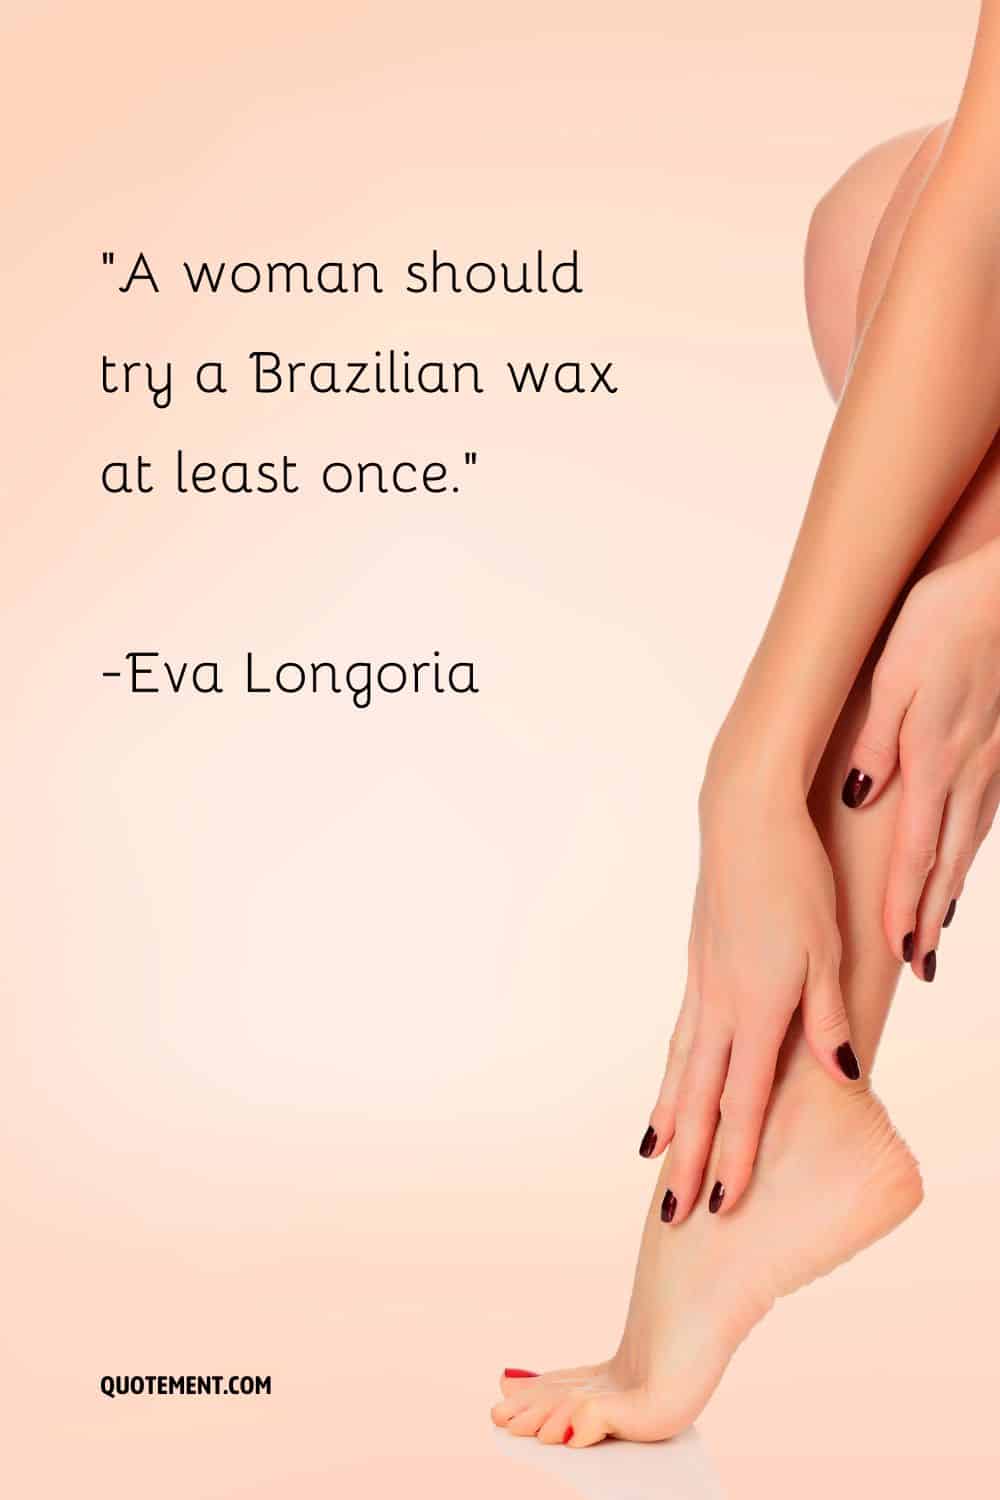 A woman should try a Brazilian wax at least once